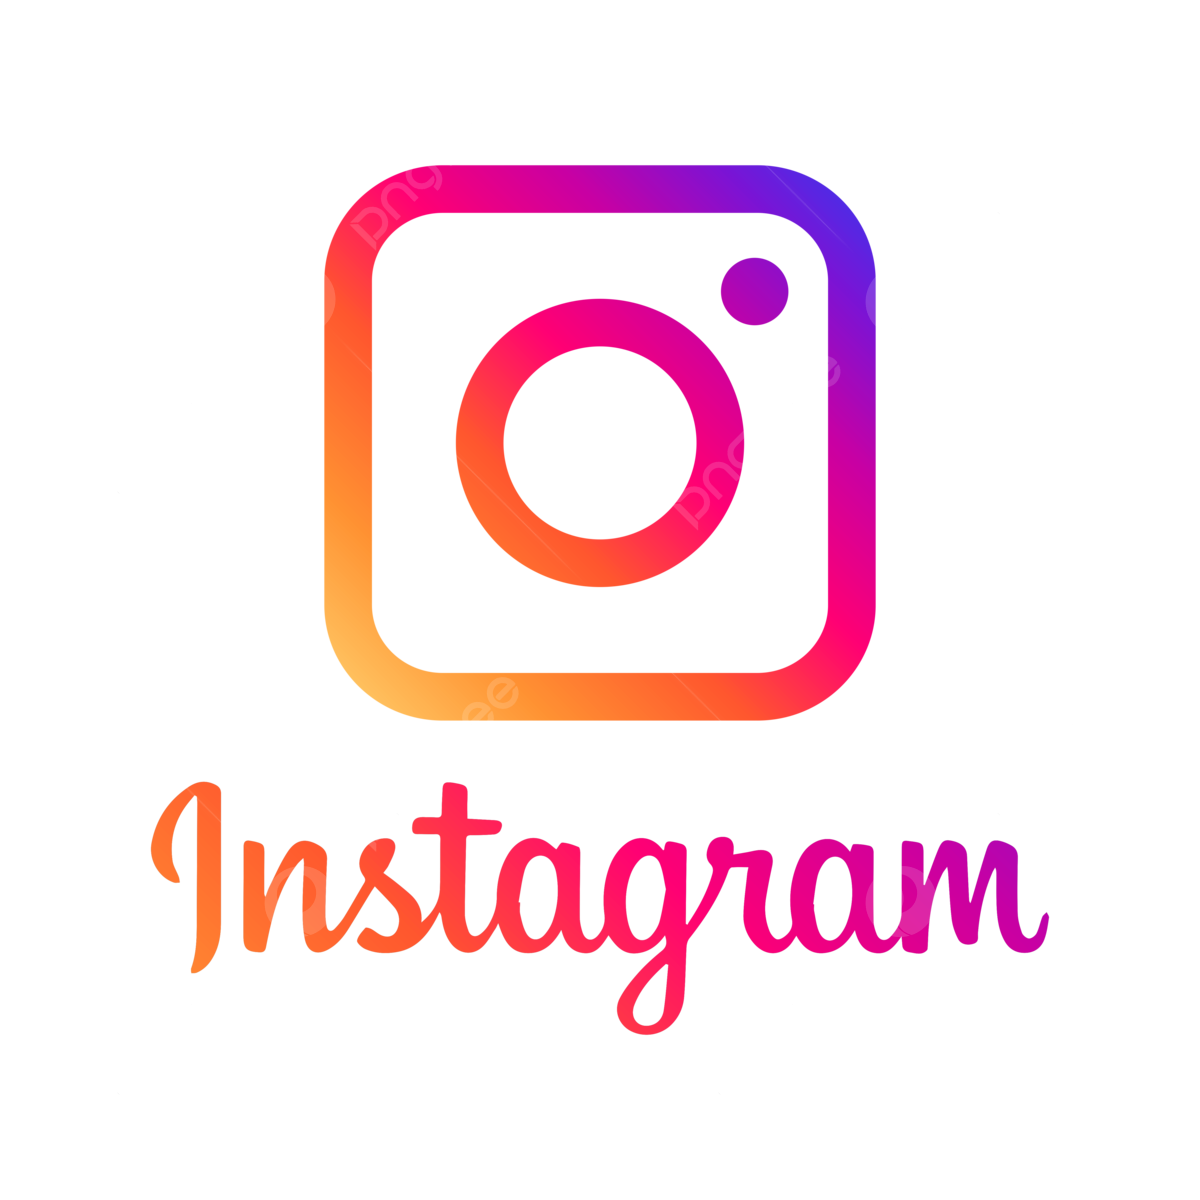 For The Latest Updates From Your School Please Follow Our Official School Instagram Page.